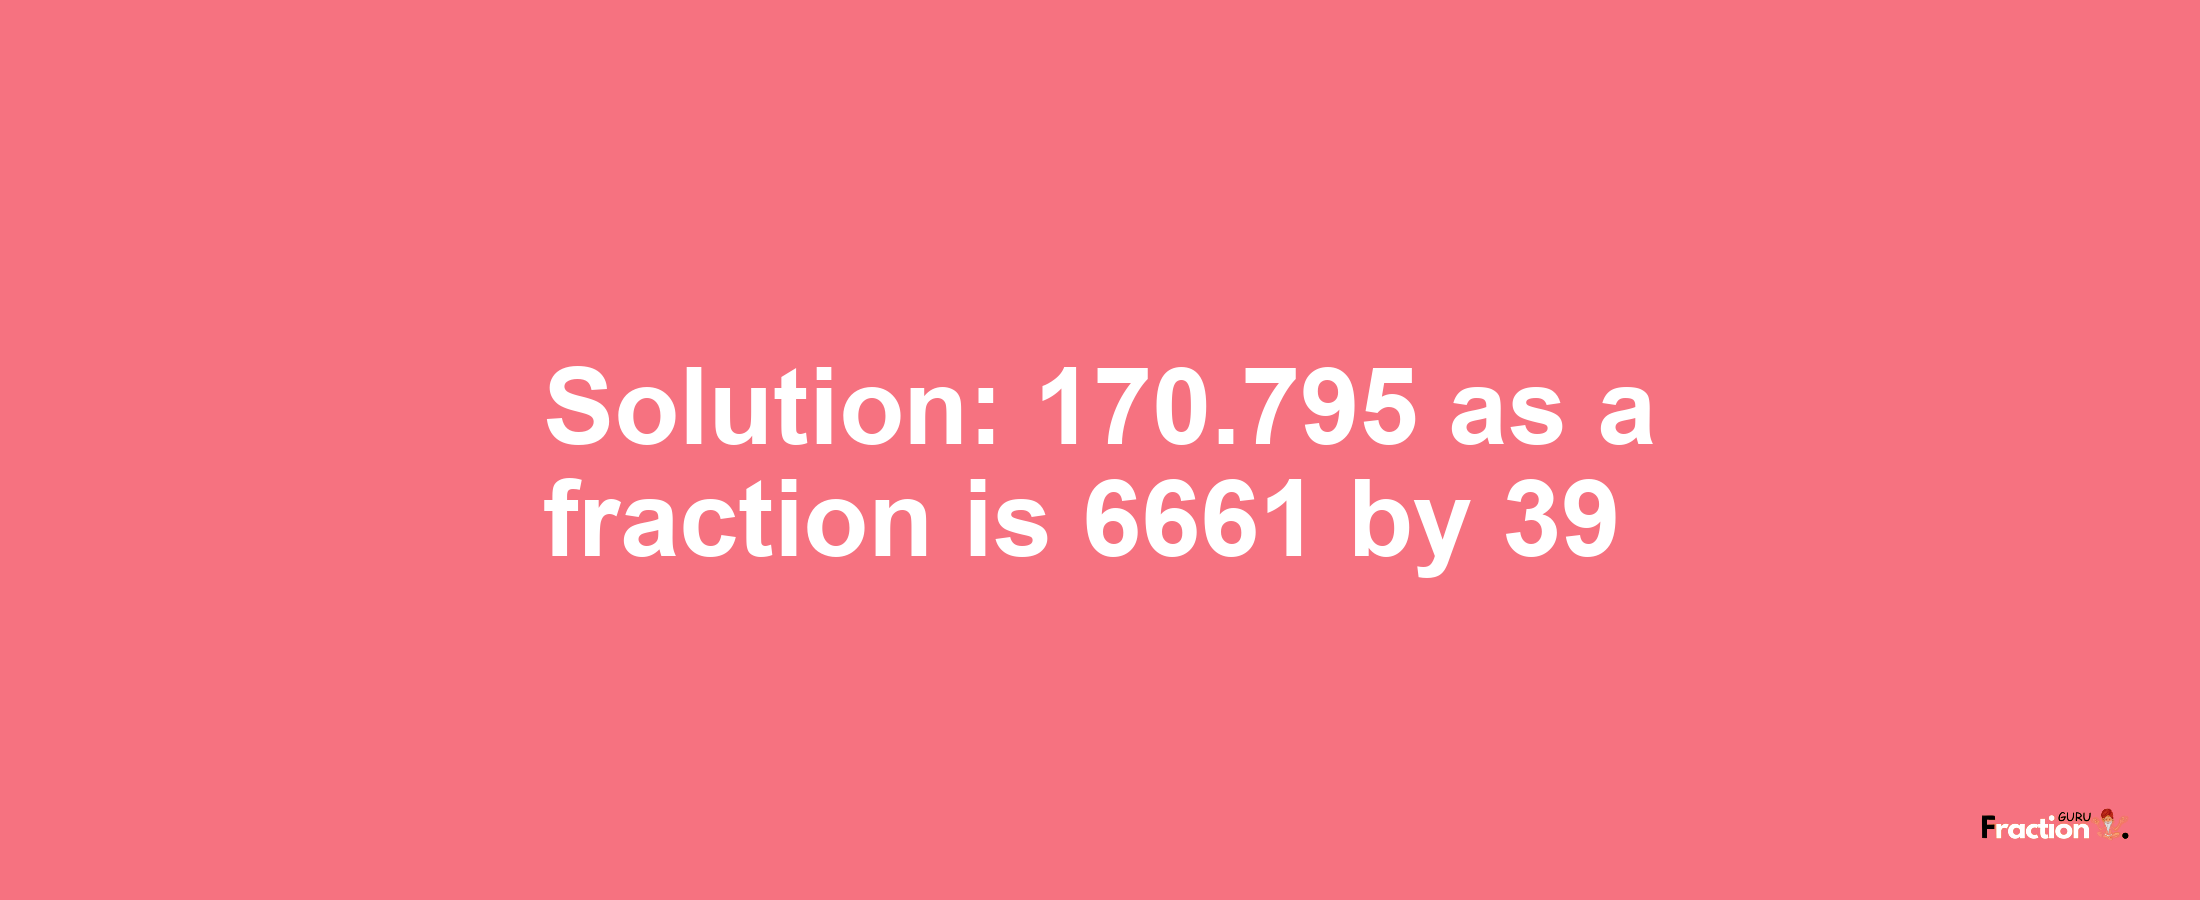 Solution:170.795 as a fraction is 6661/39